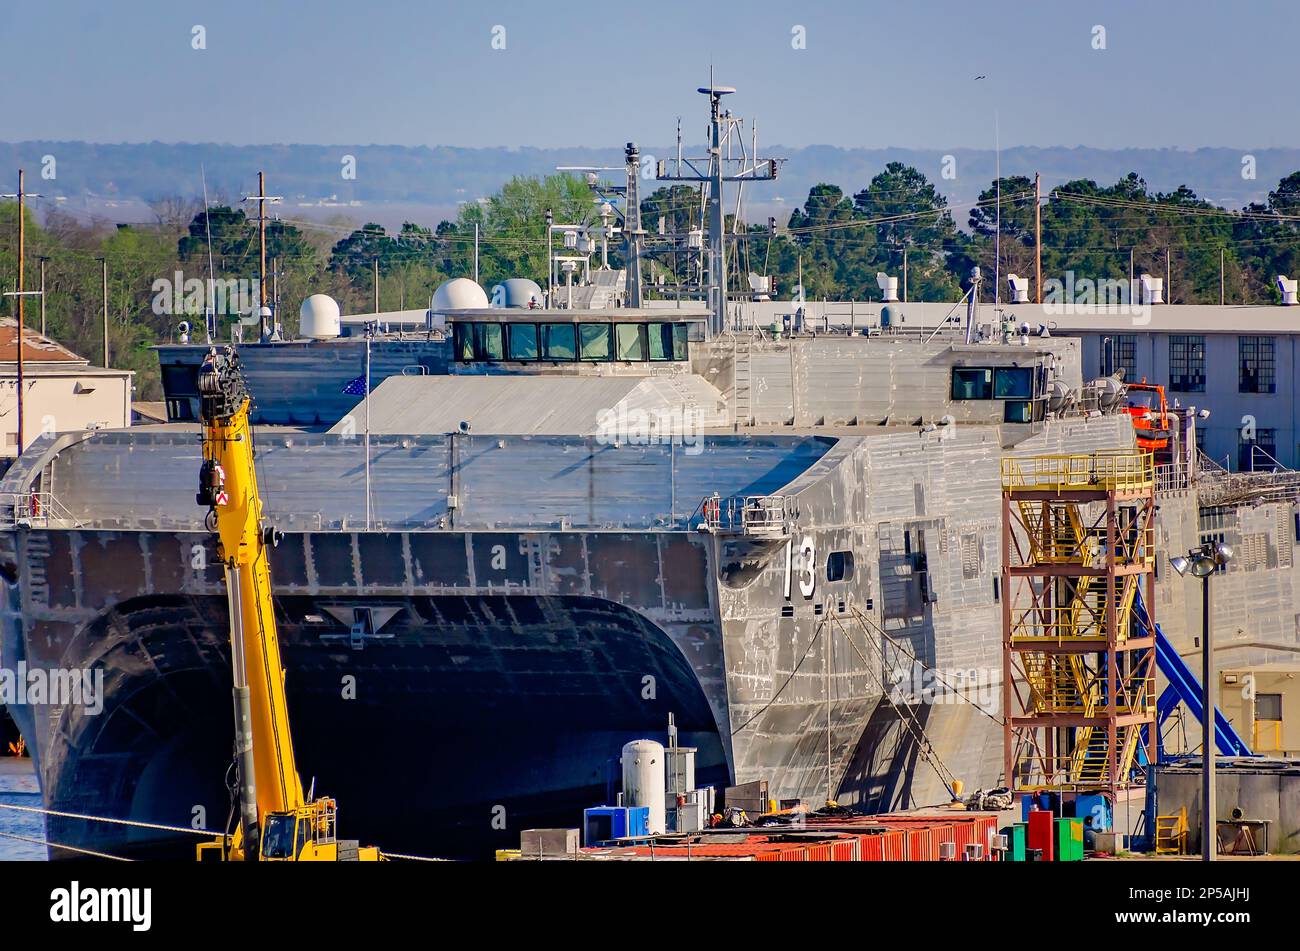 The USNS Apalachicola (EPF 13) is docked outside Austal USA’s shipbuilding facility on the Mobile River, Jan. 30, 2023, in Mobile, Alabama. Stock Photo